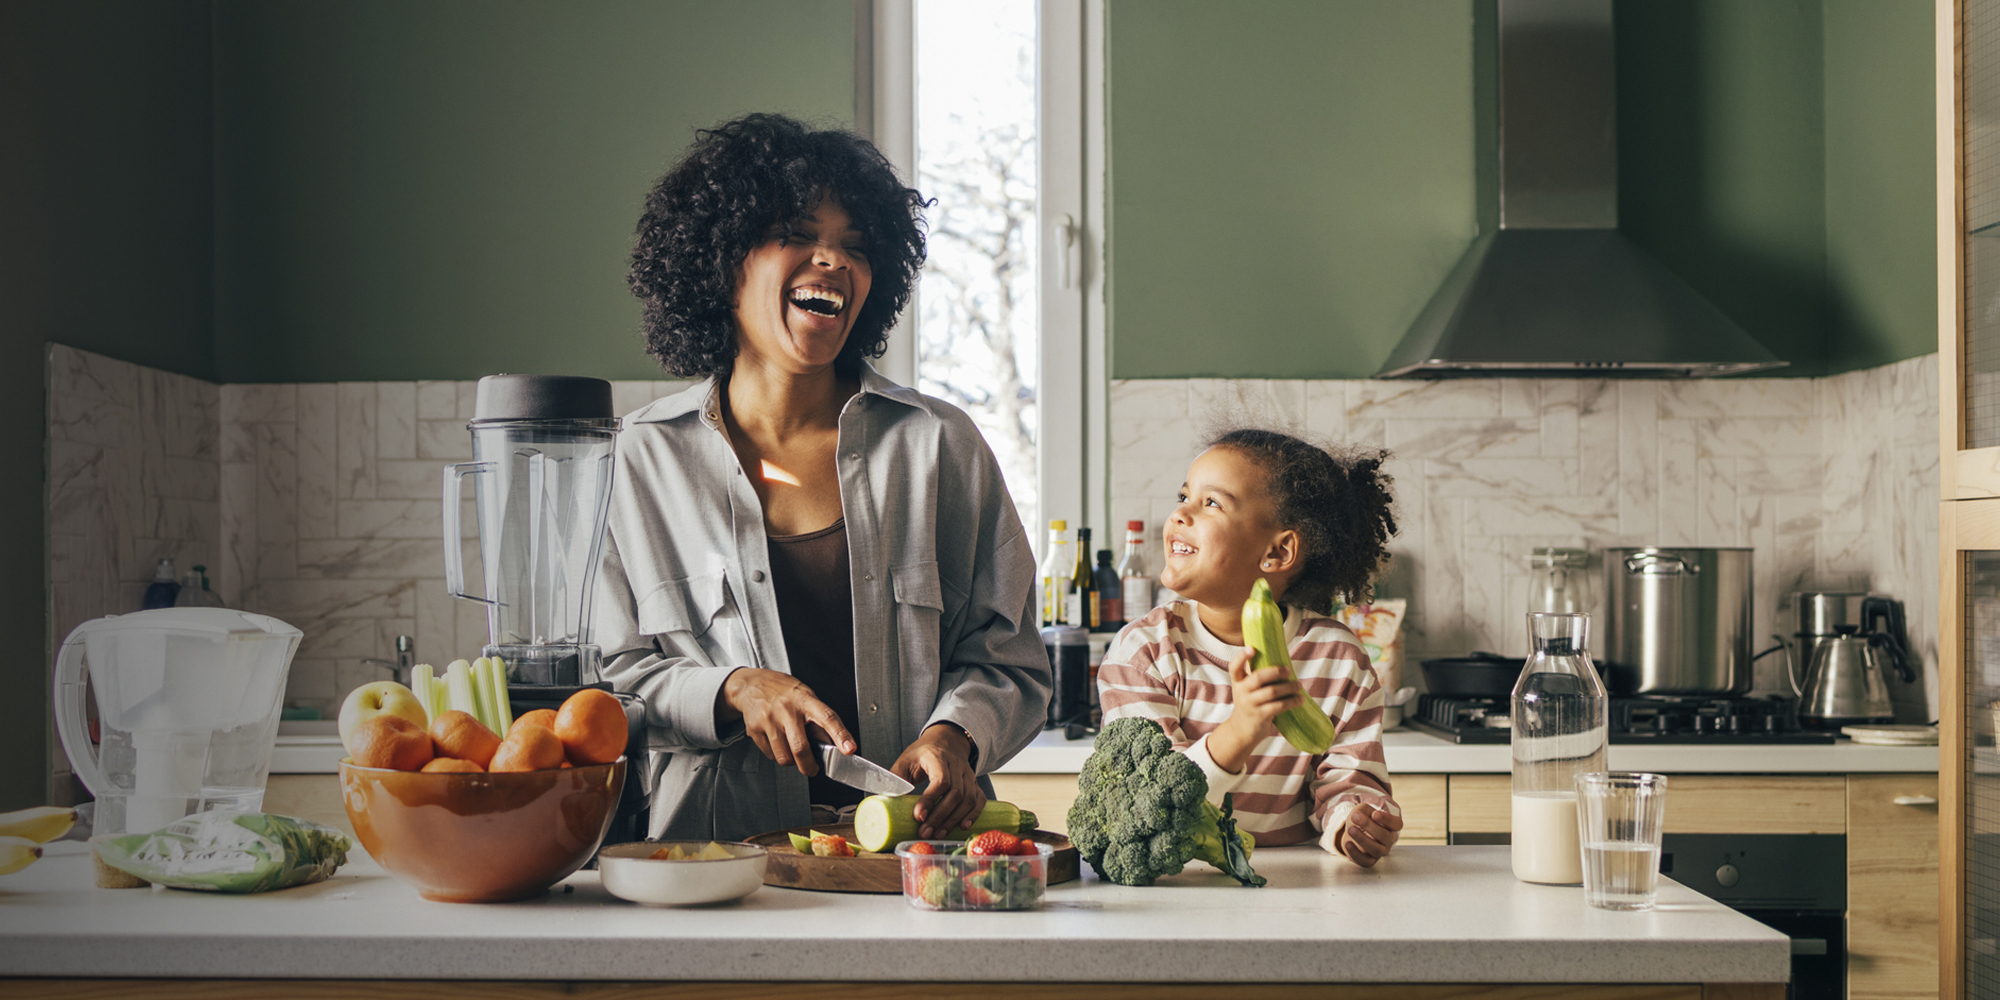 mom and daughter with fruit laughing in kitchen